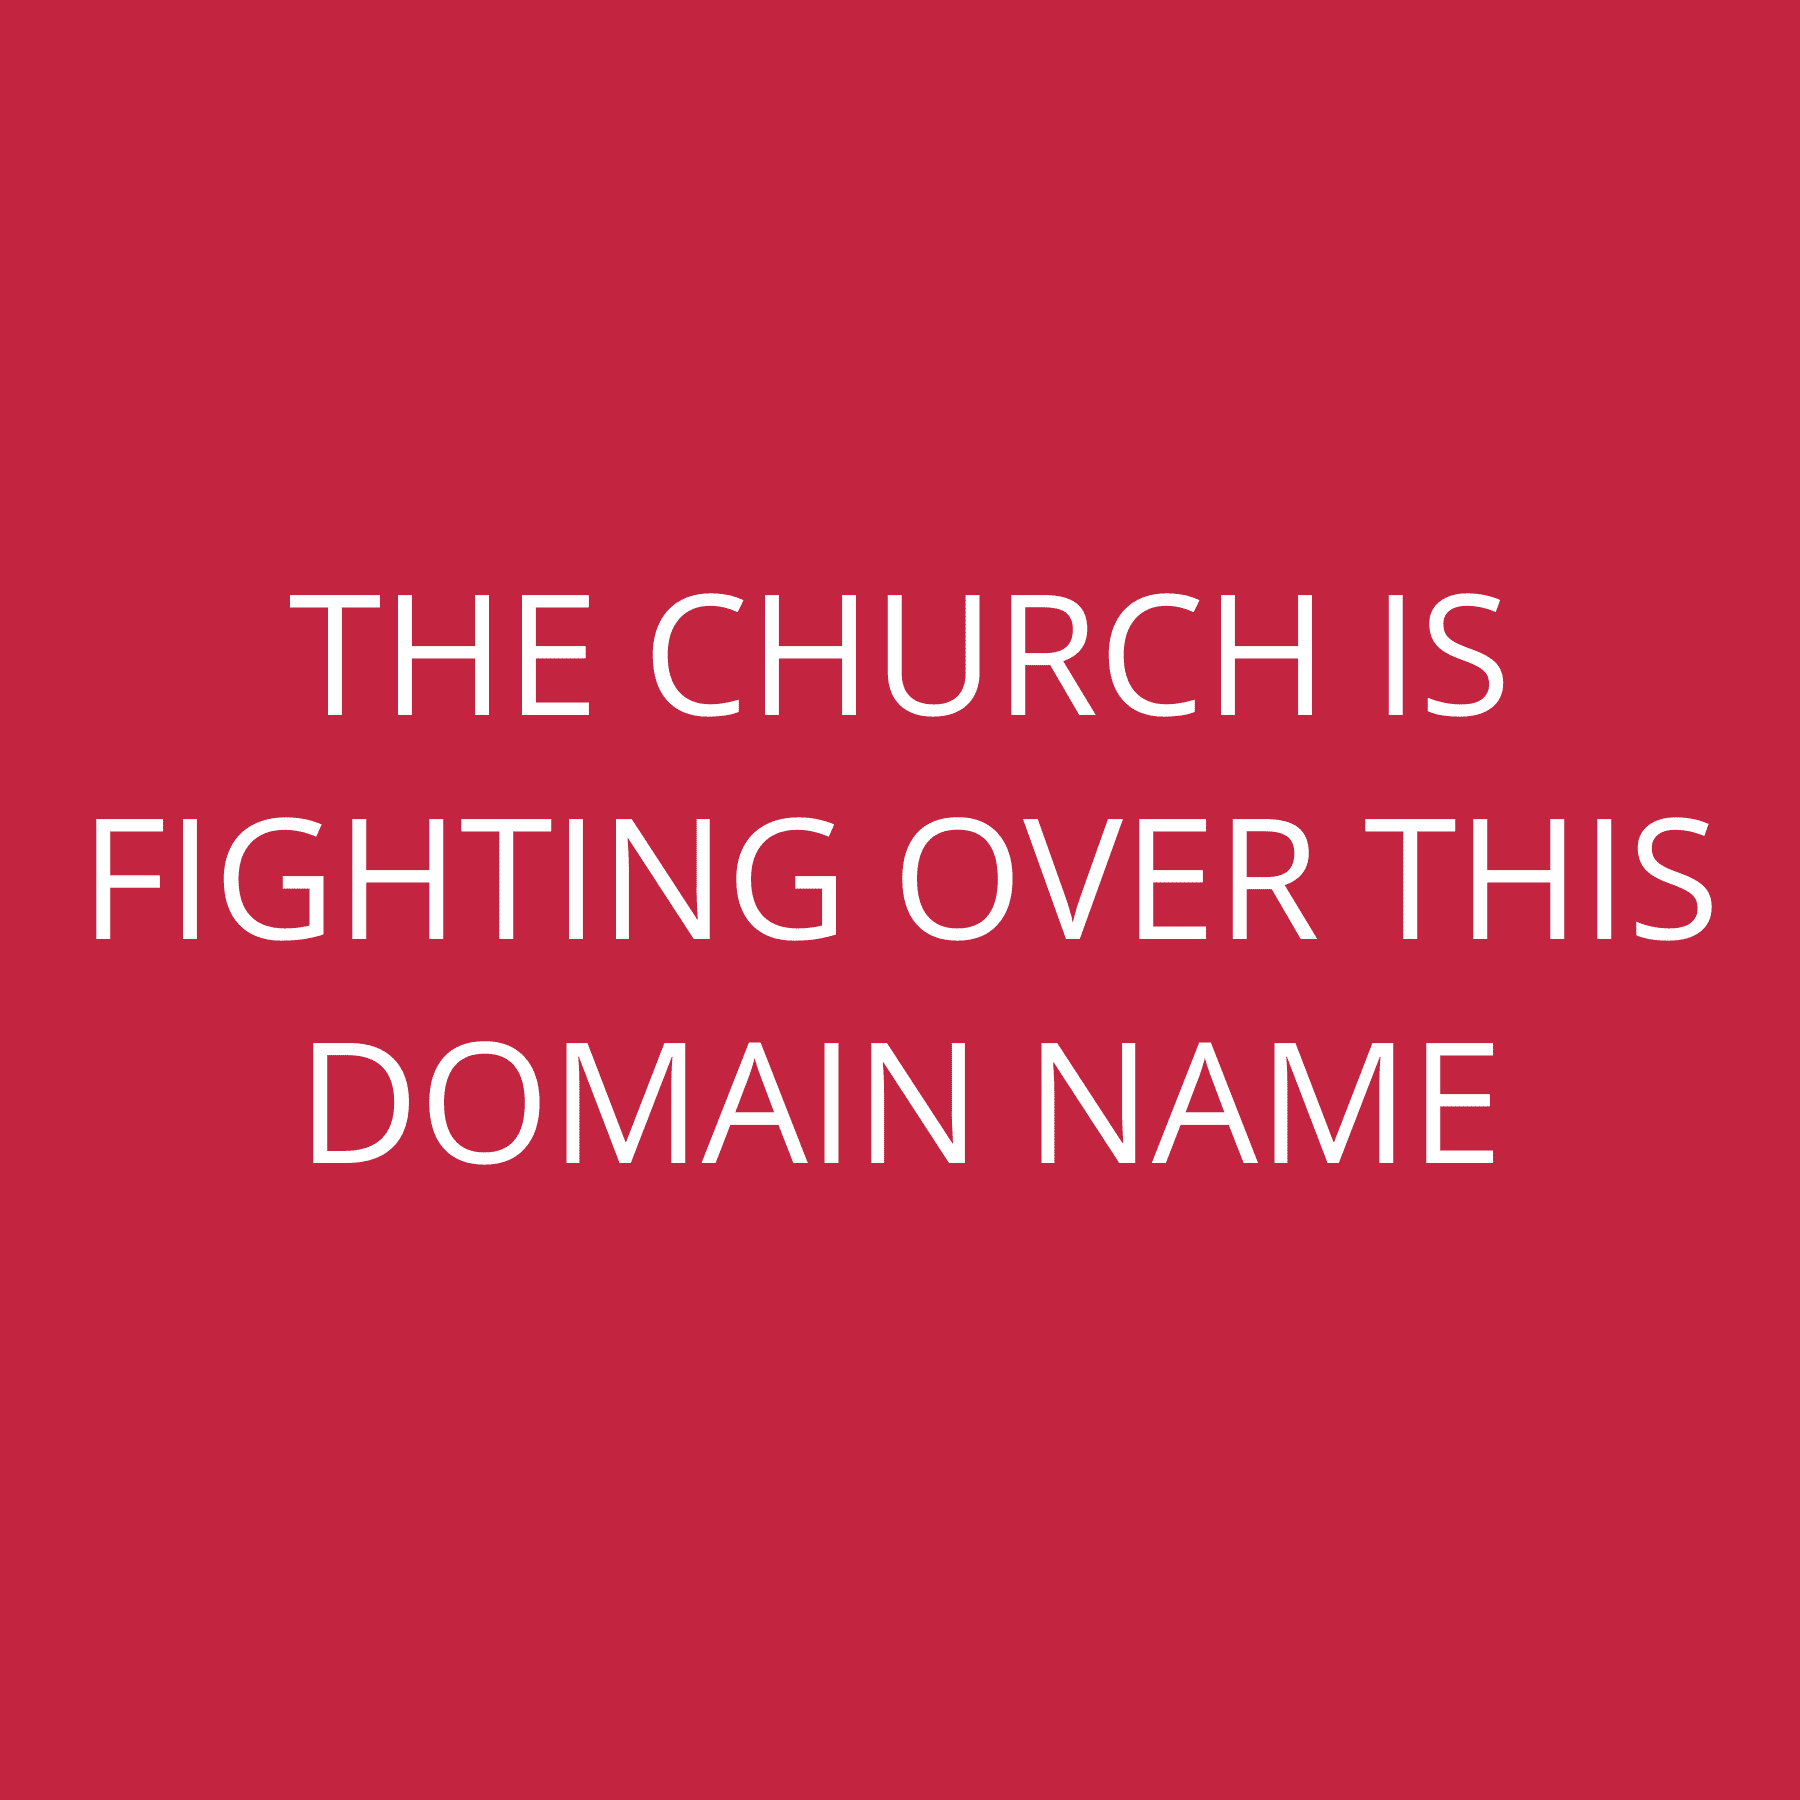 The Church is fighting over this domain name